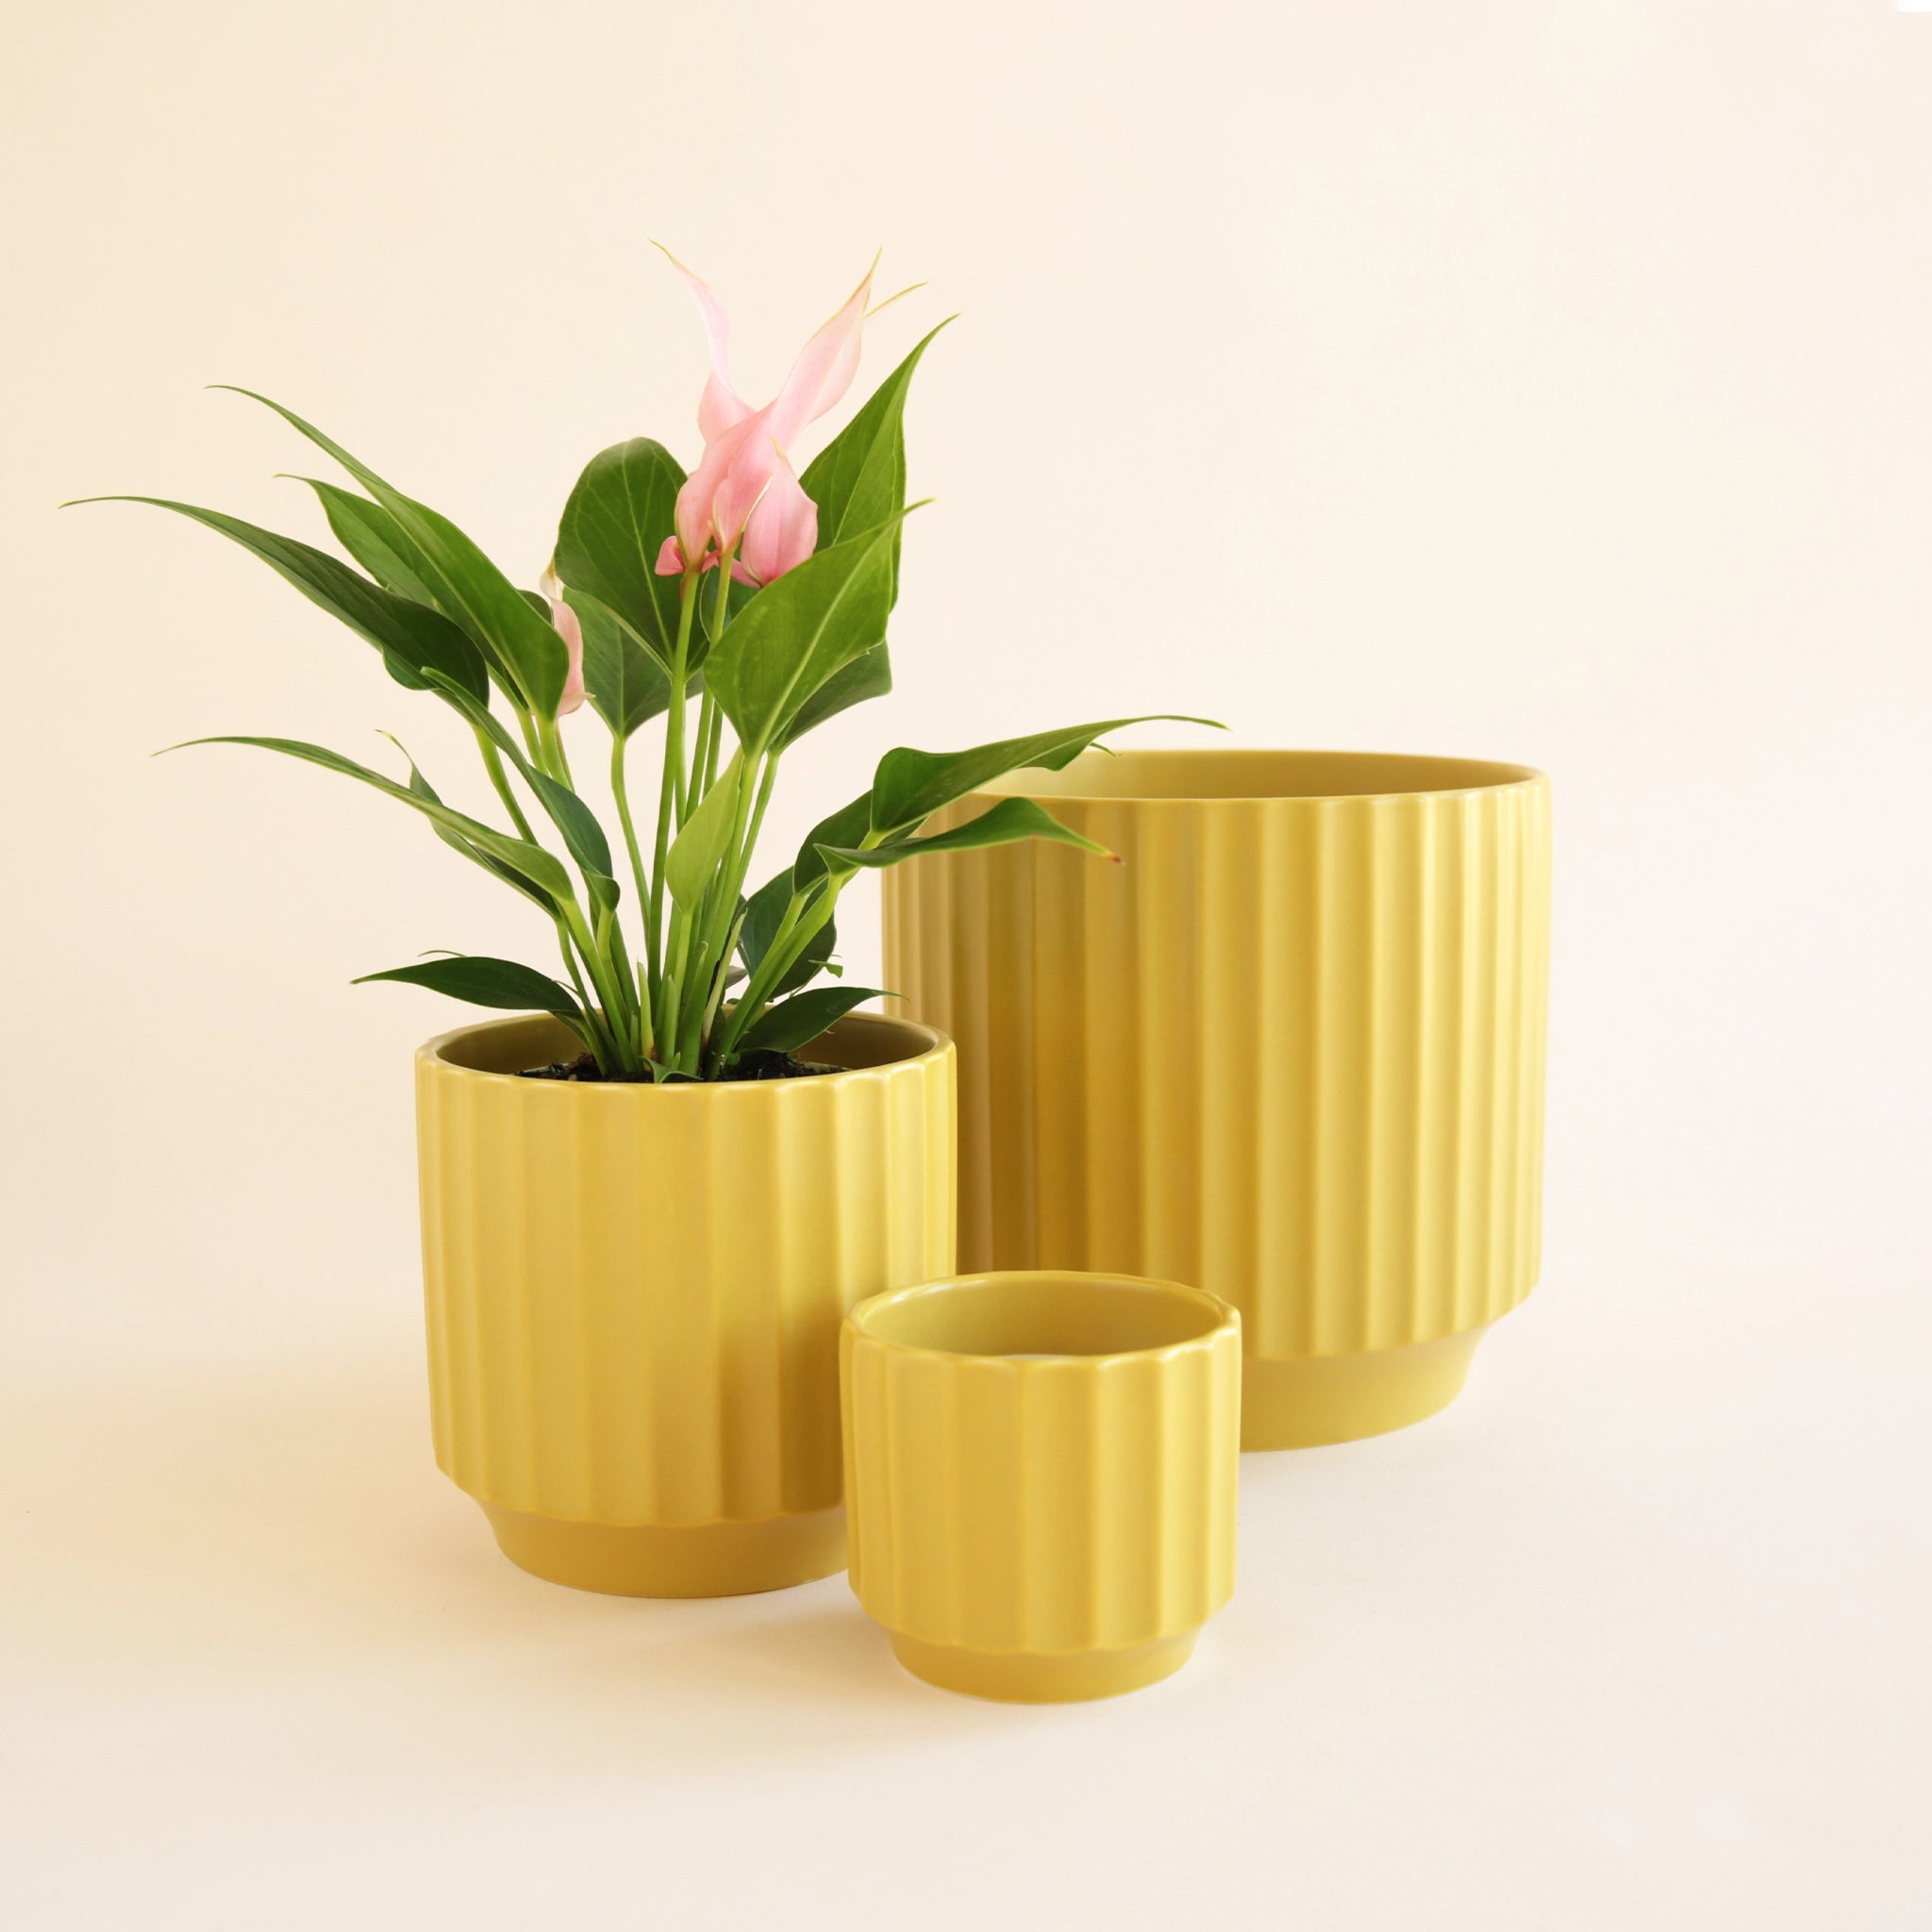 On an ivory background is three different sized charteuese ceramic pots with a ribbed texture around the sides.